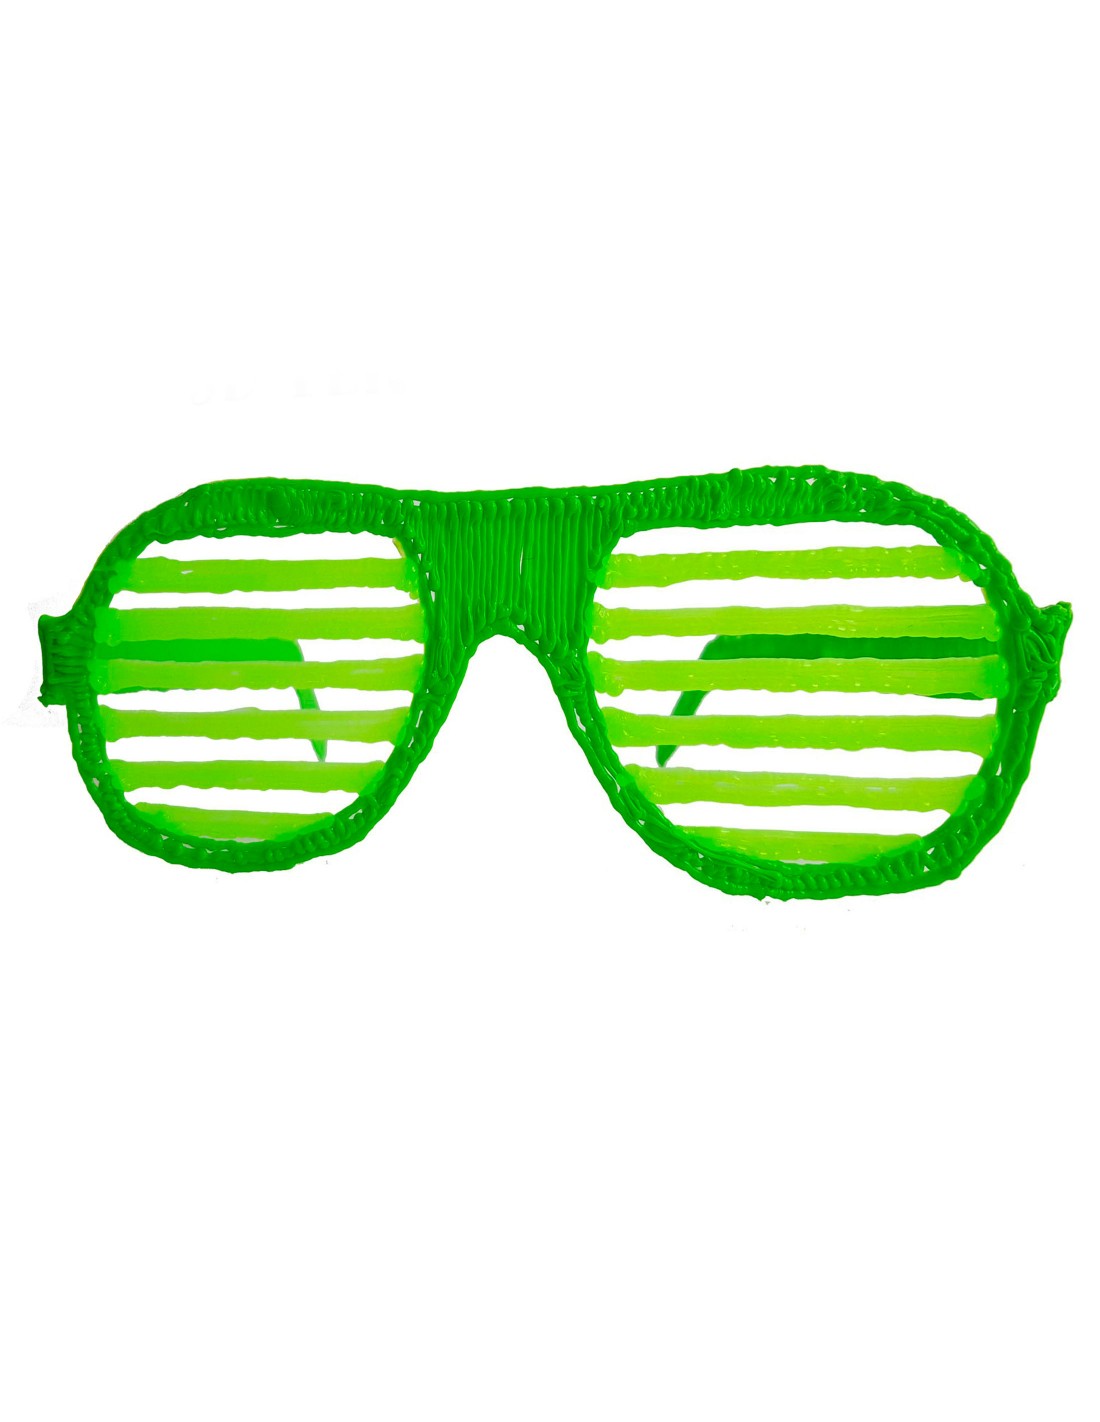 glasses-6-disco-free-template-for-a-3d-pen